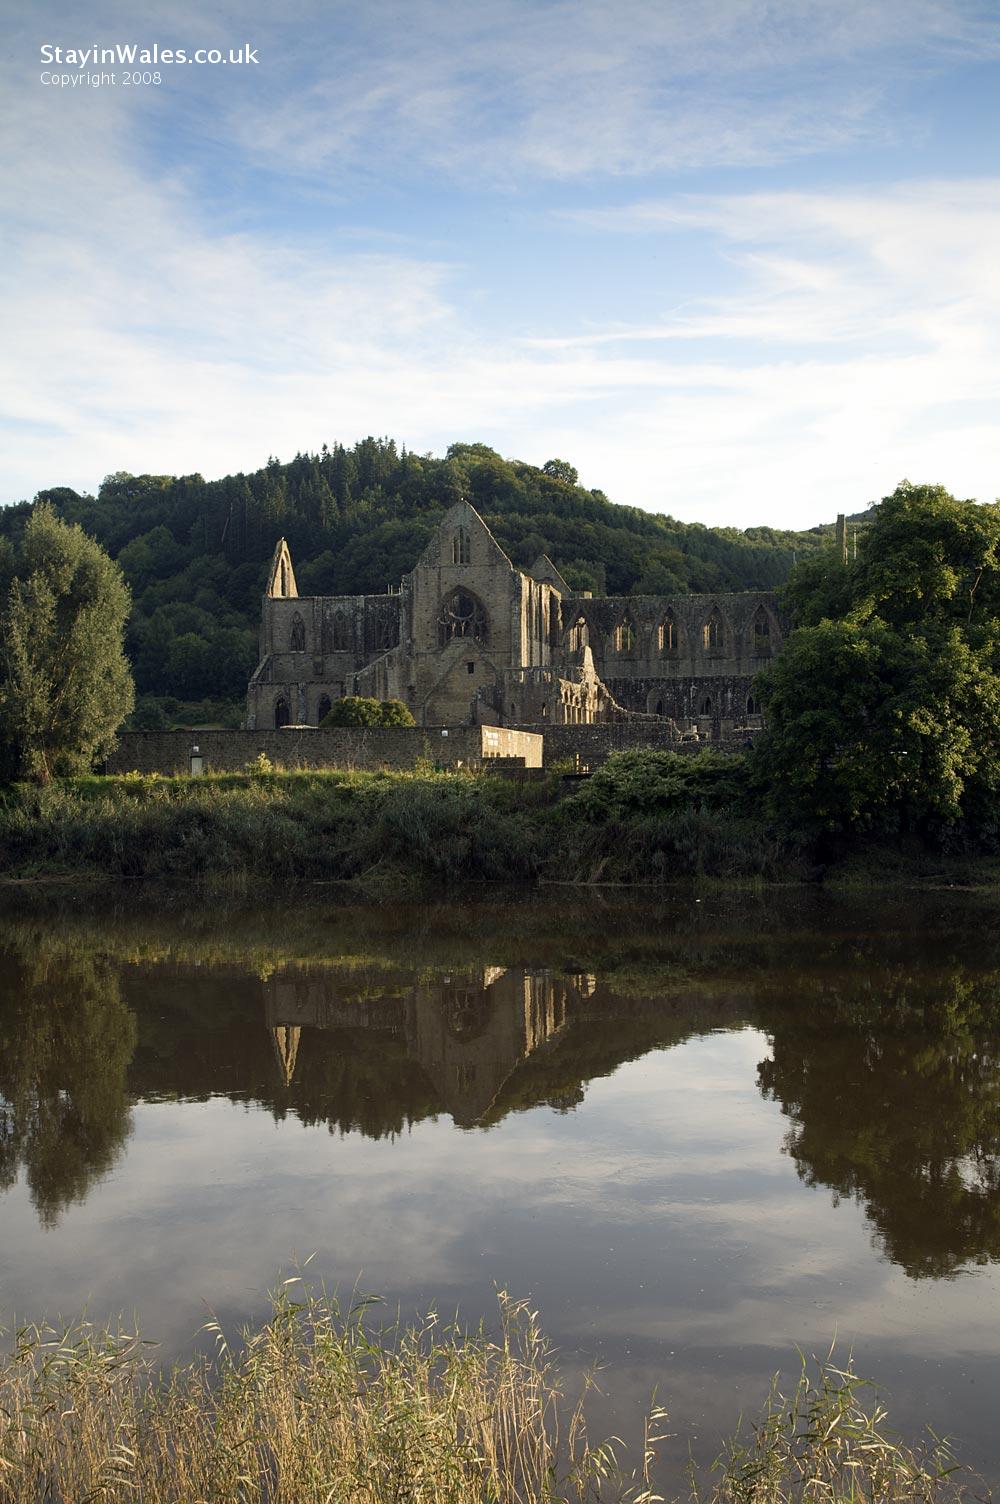 Tintern Abbey, between Monmouth and Chepstow